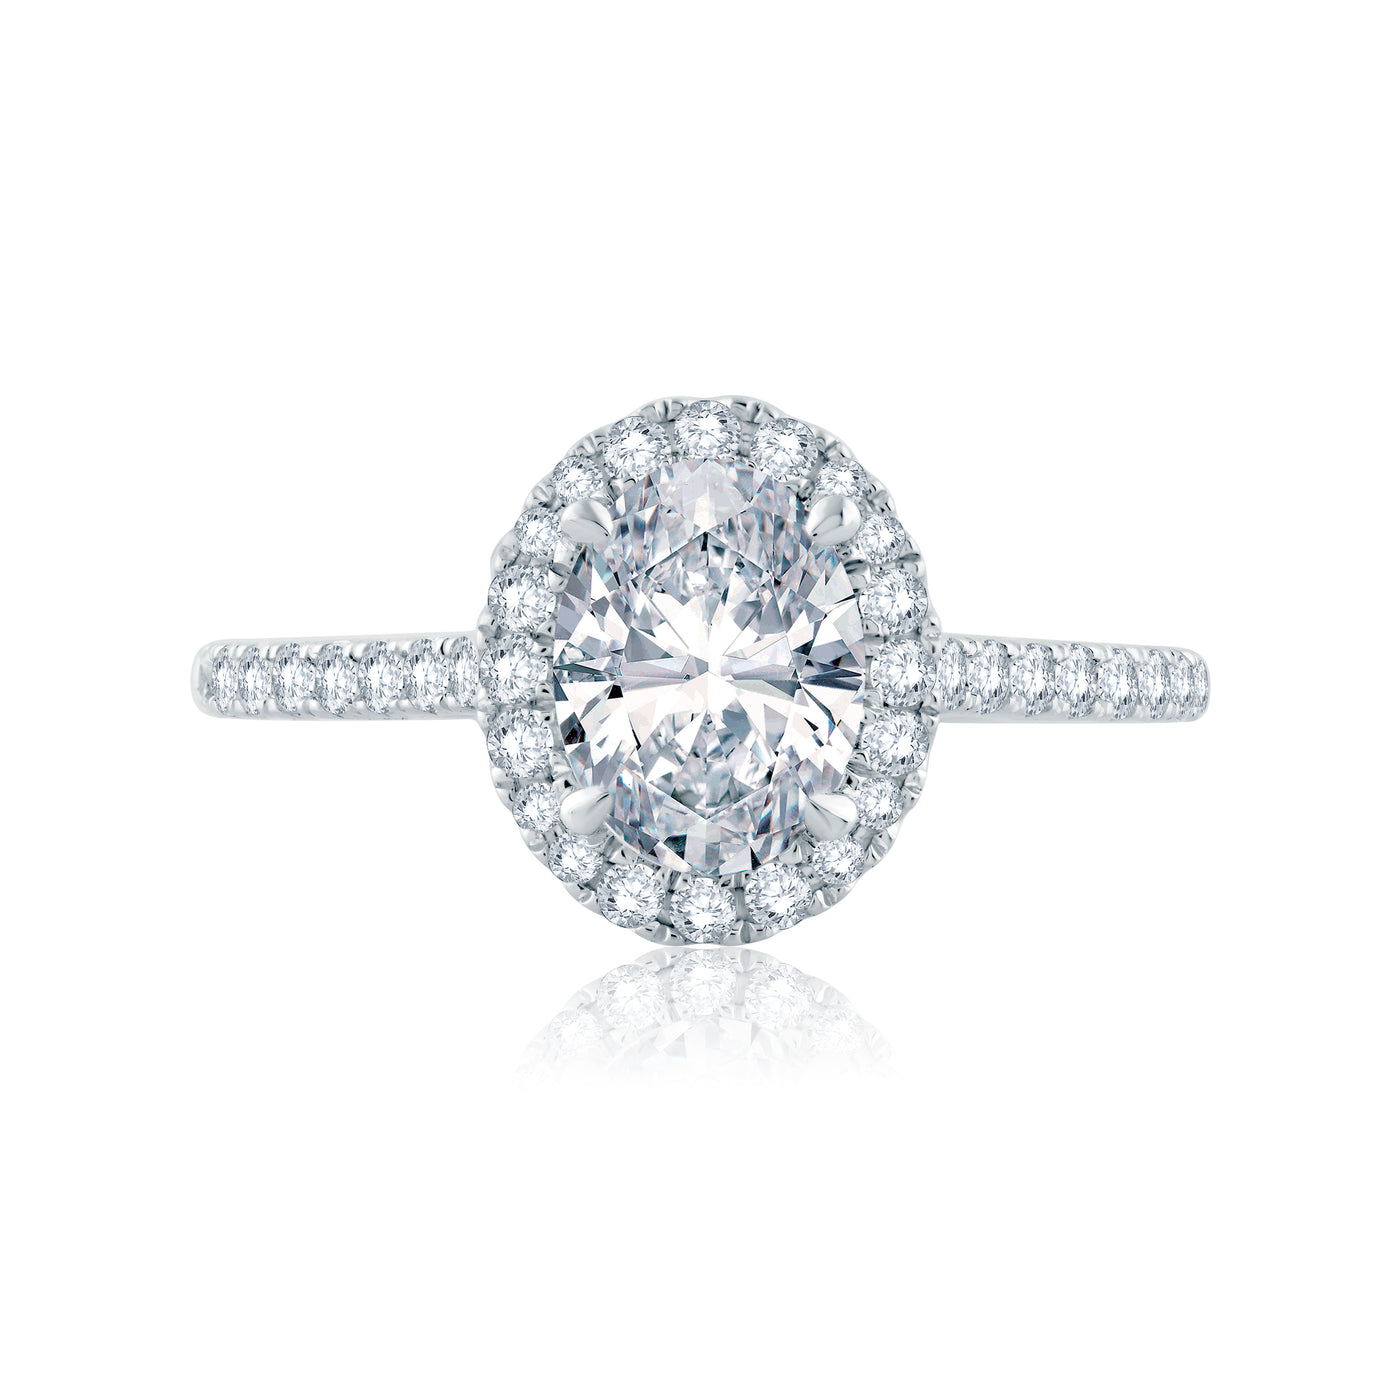 Intricate Gallery Detail Oval Halo Engagement Ring